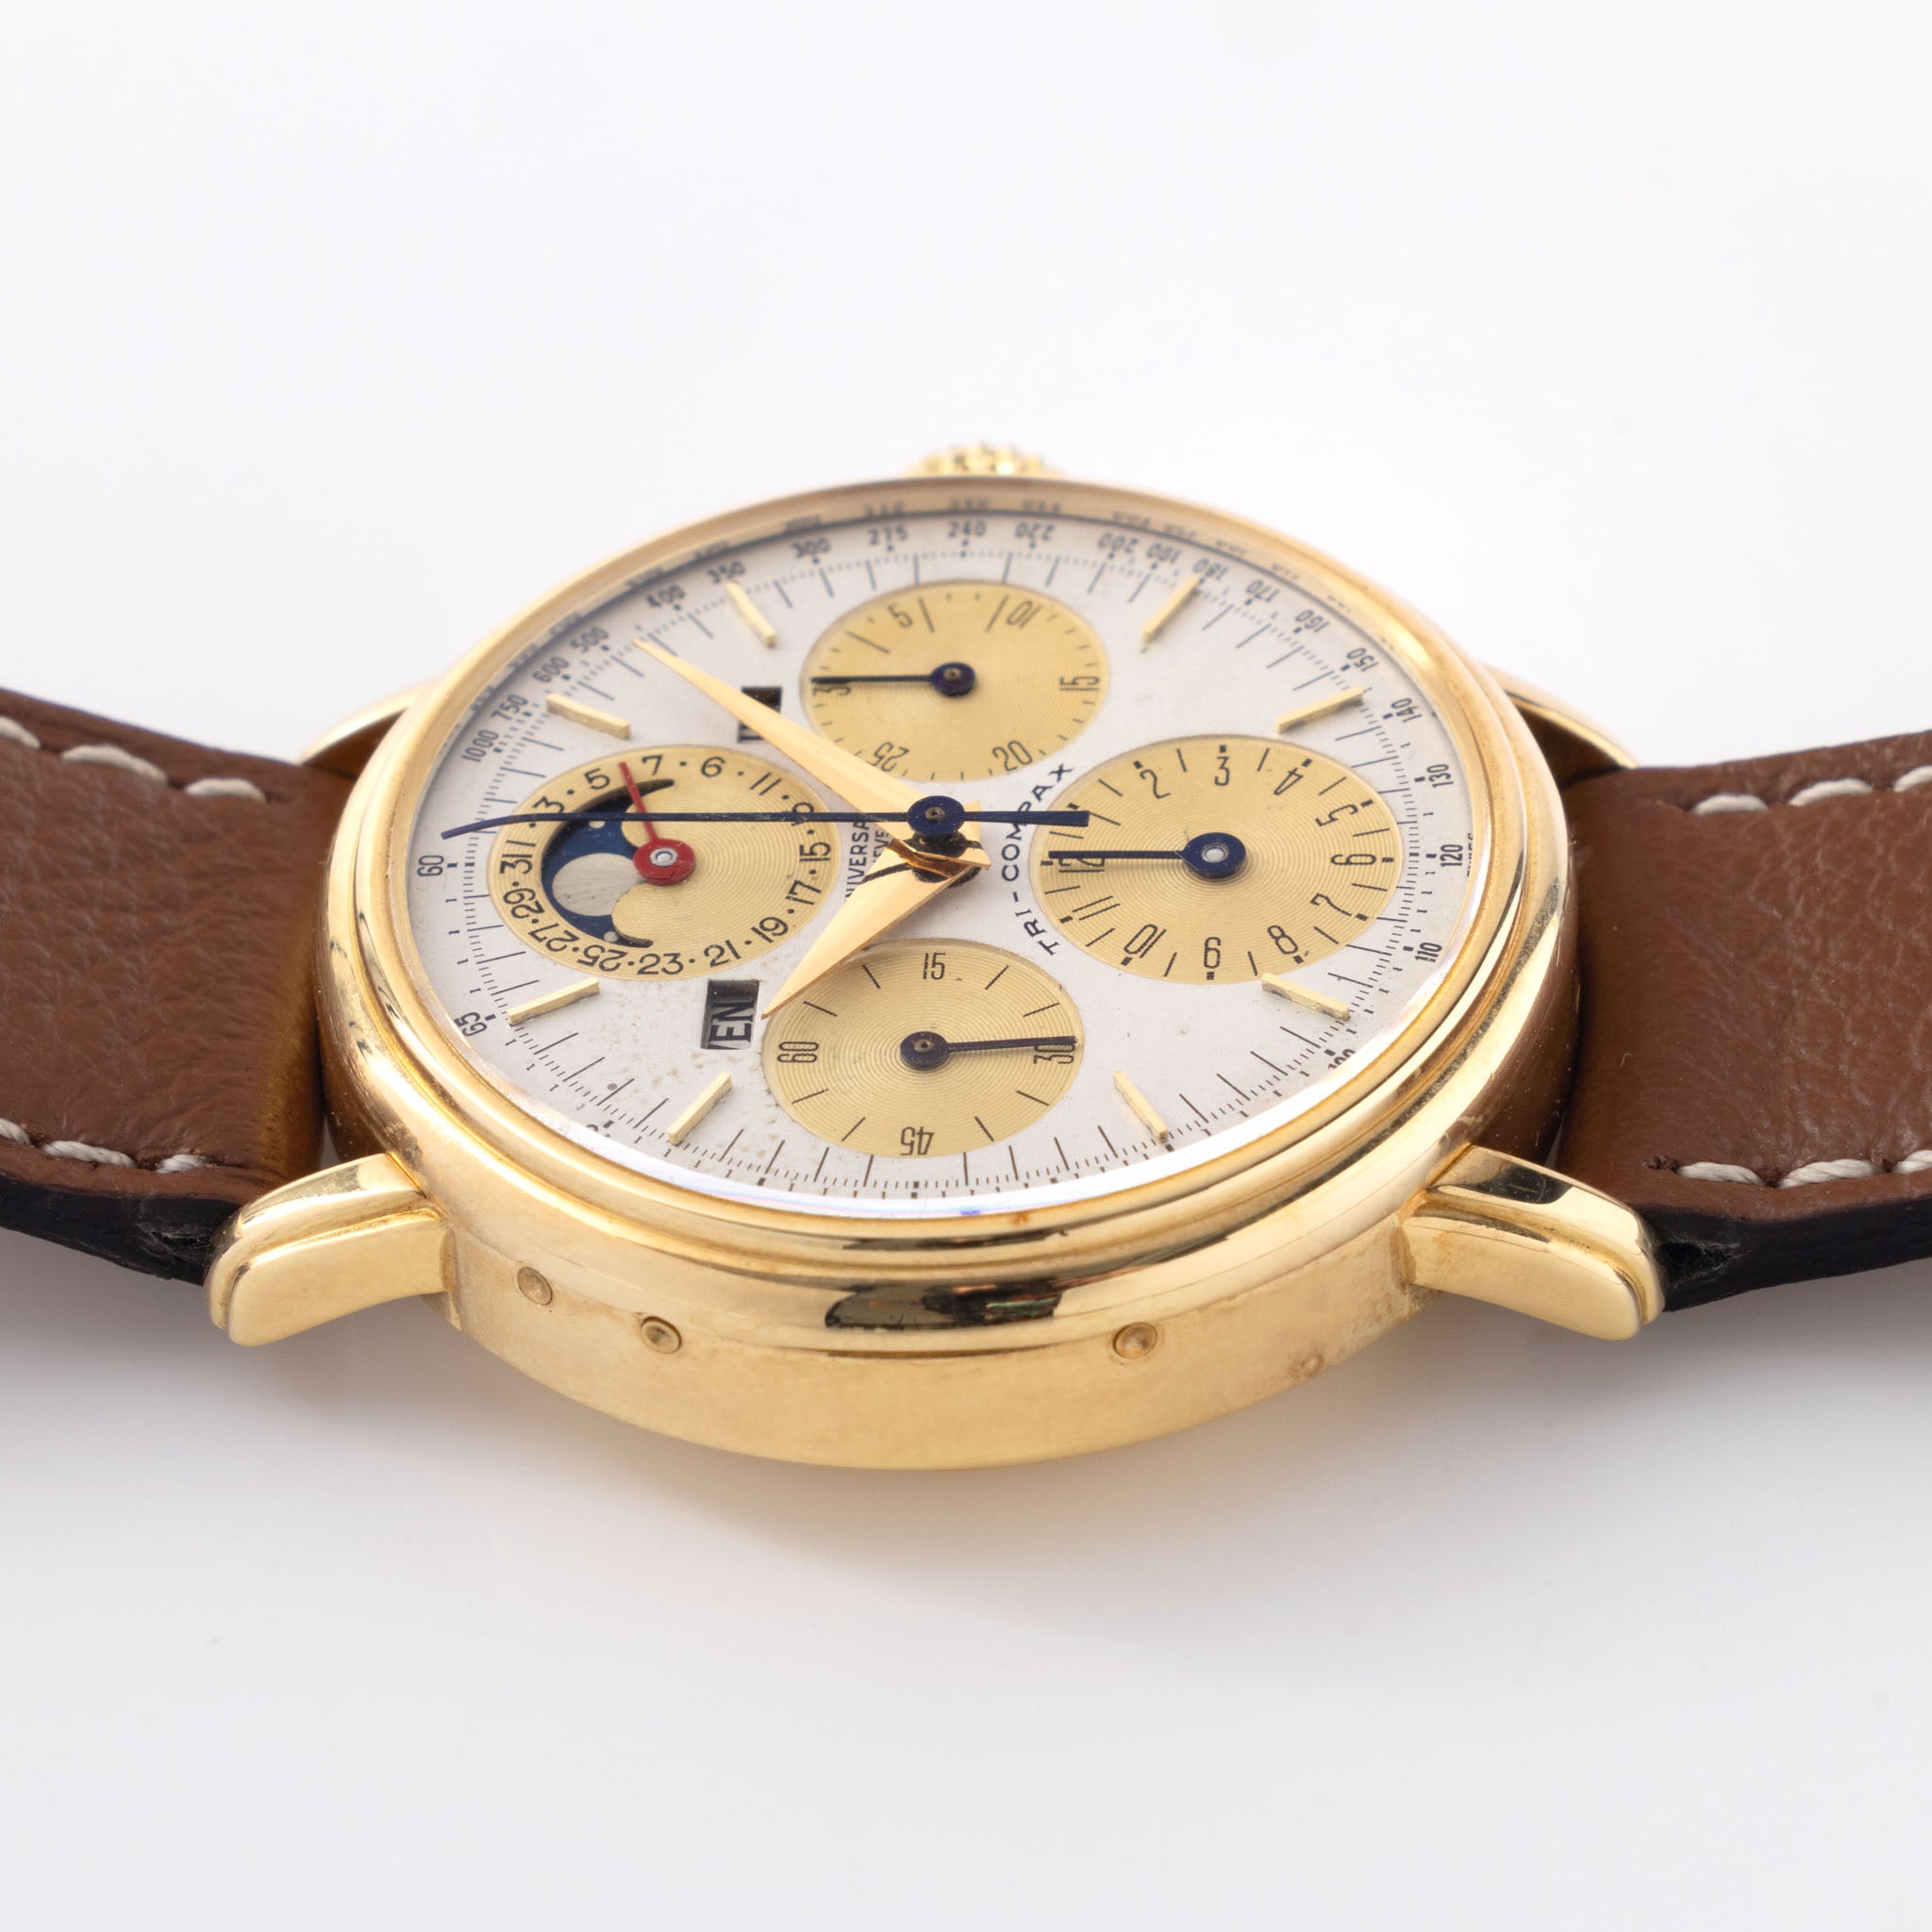 Universal Genève Tri-Compax in 18k Yellow Gold with Original Box and Guarantee Paper Ref 1.281.100